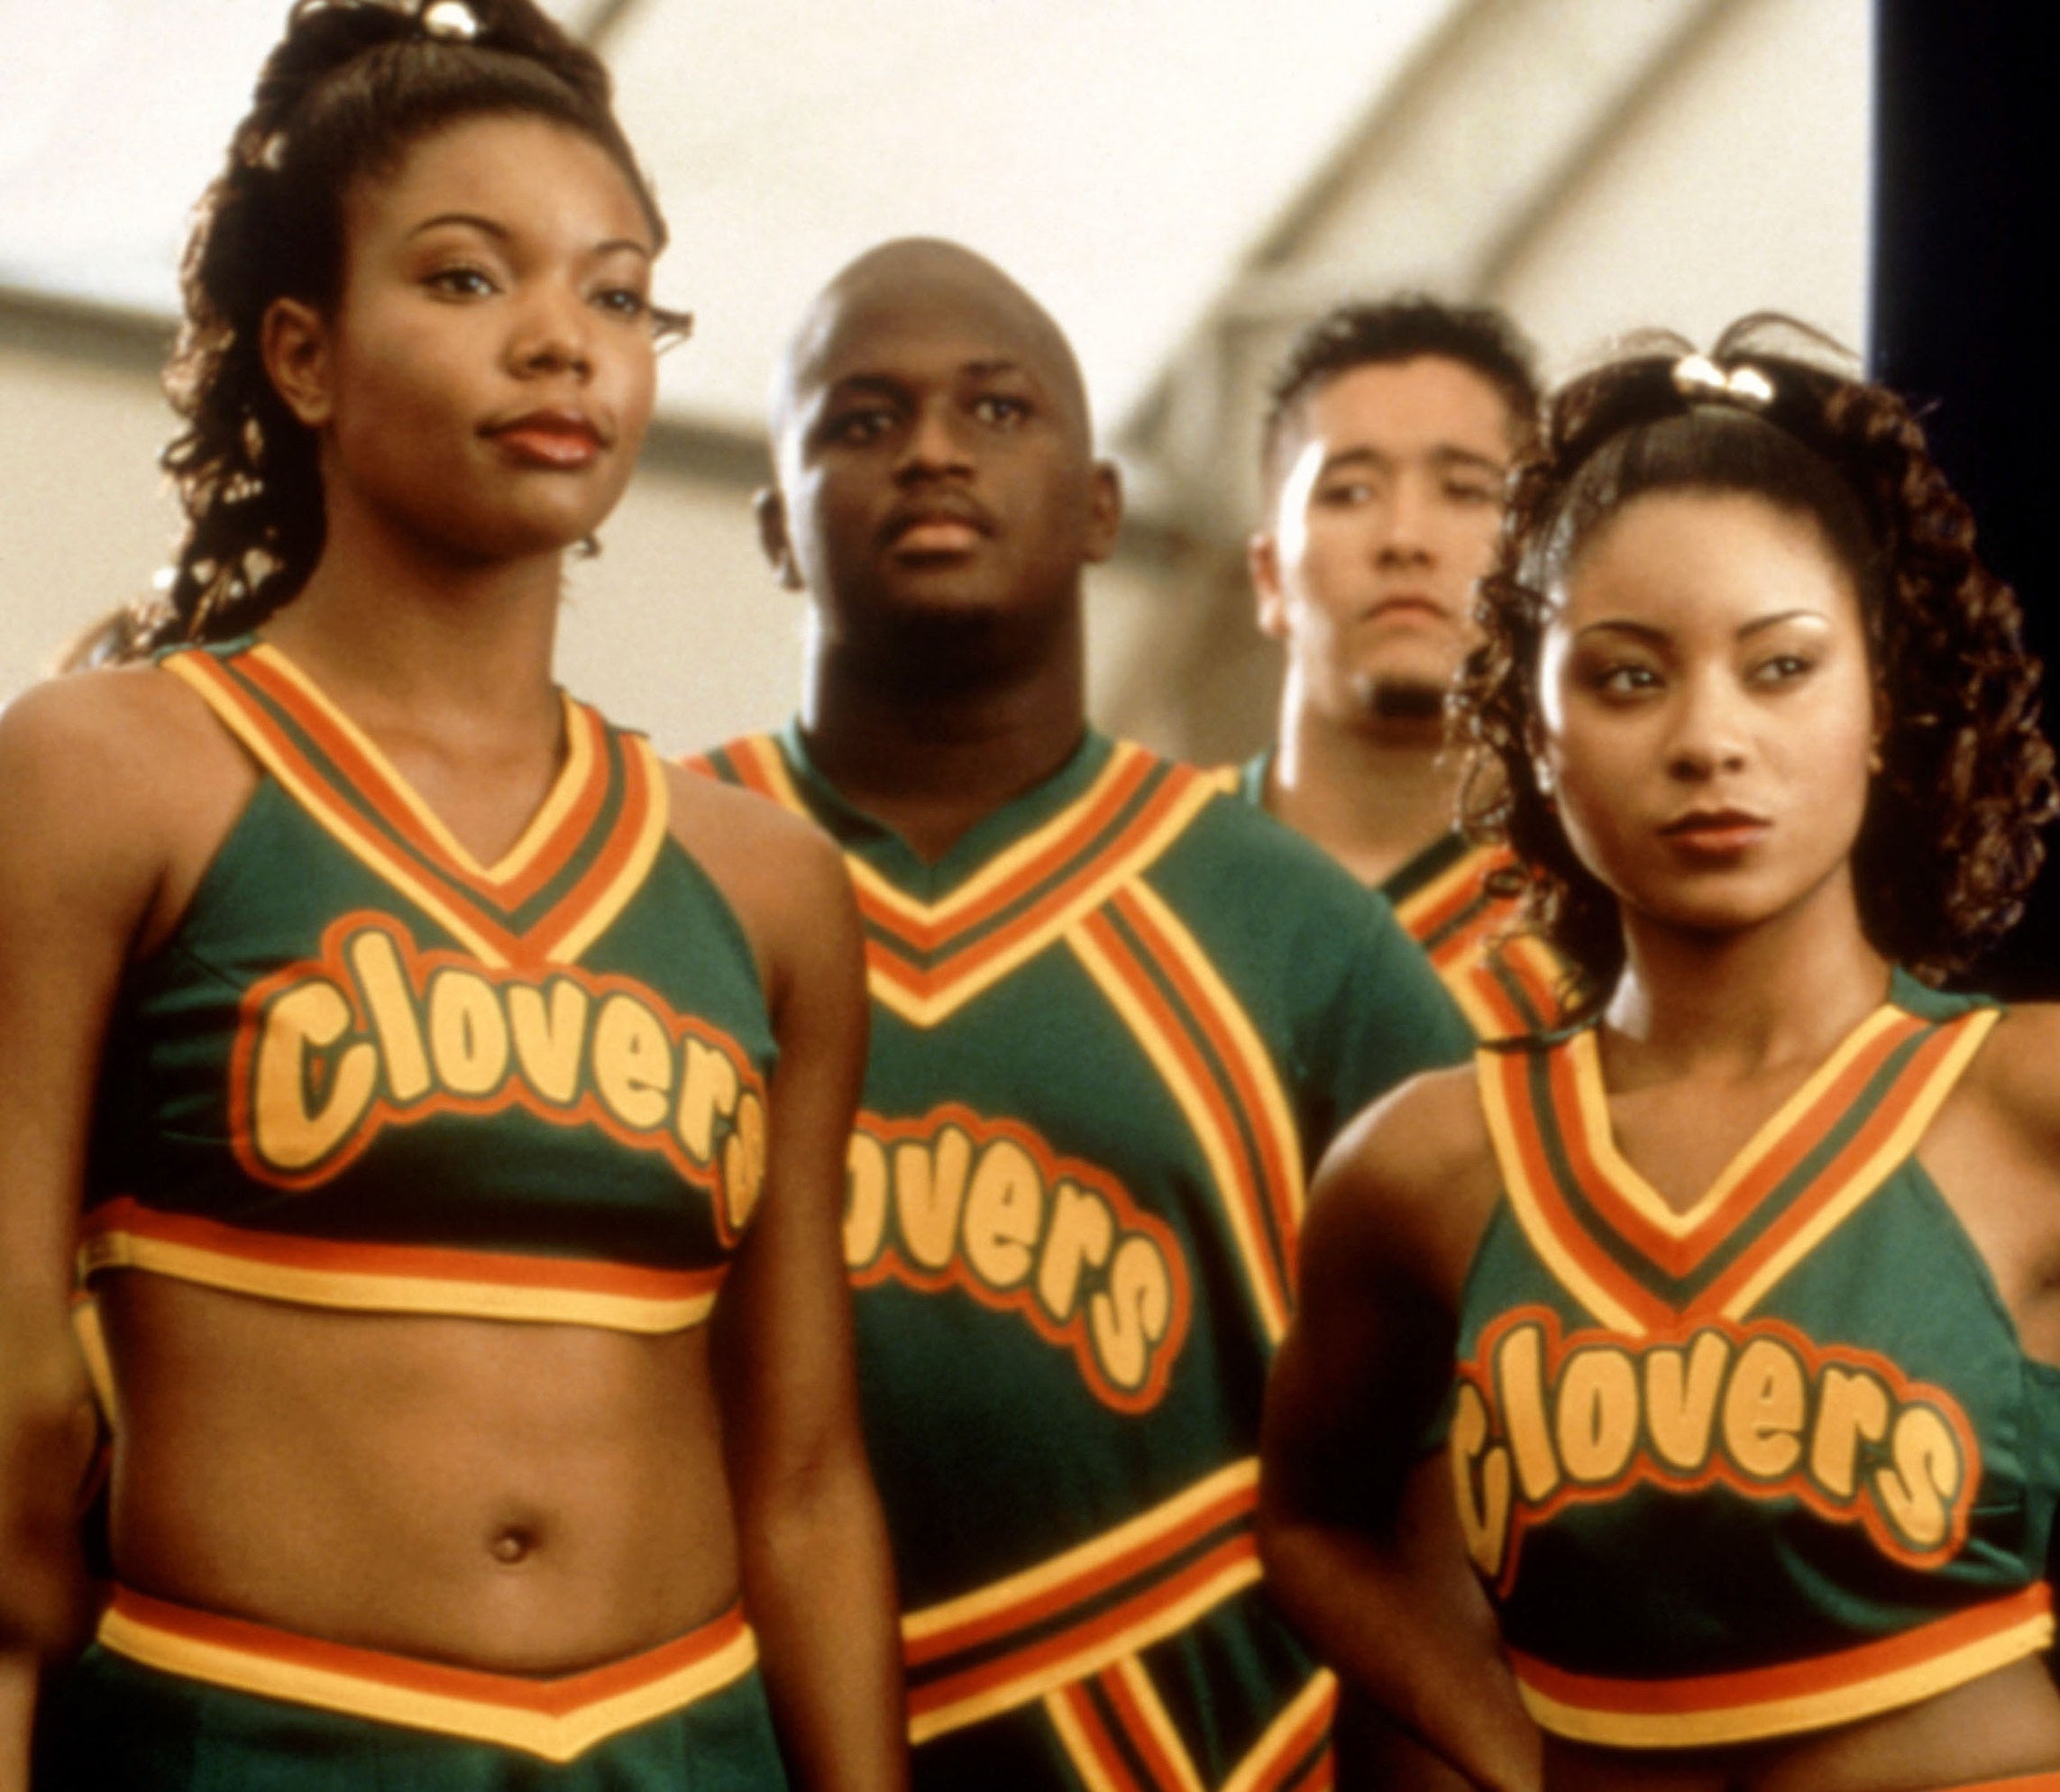 Gabrielle Union as Isis wears her Clovers cheerleading outfit next to fellow cheerleaders